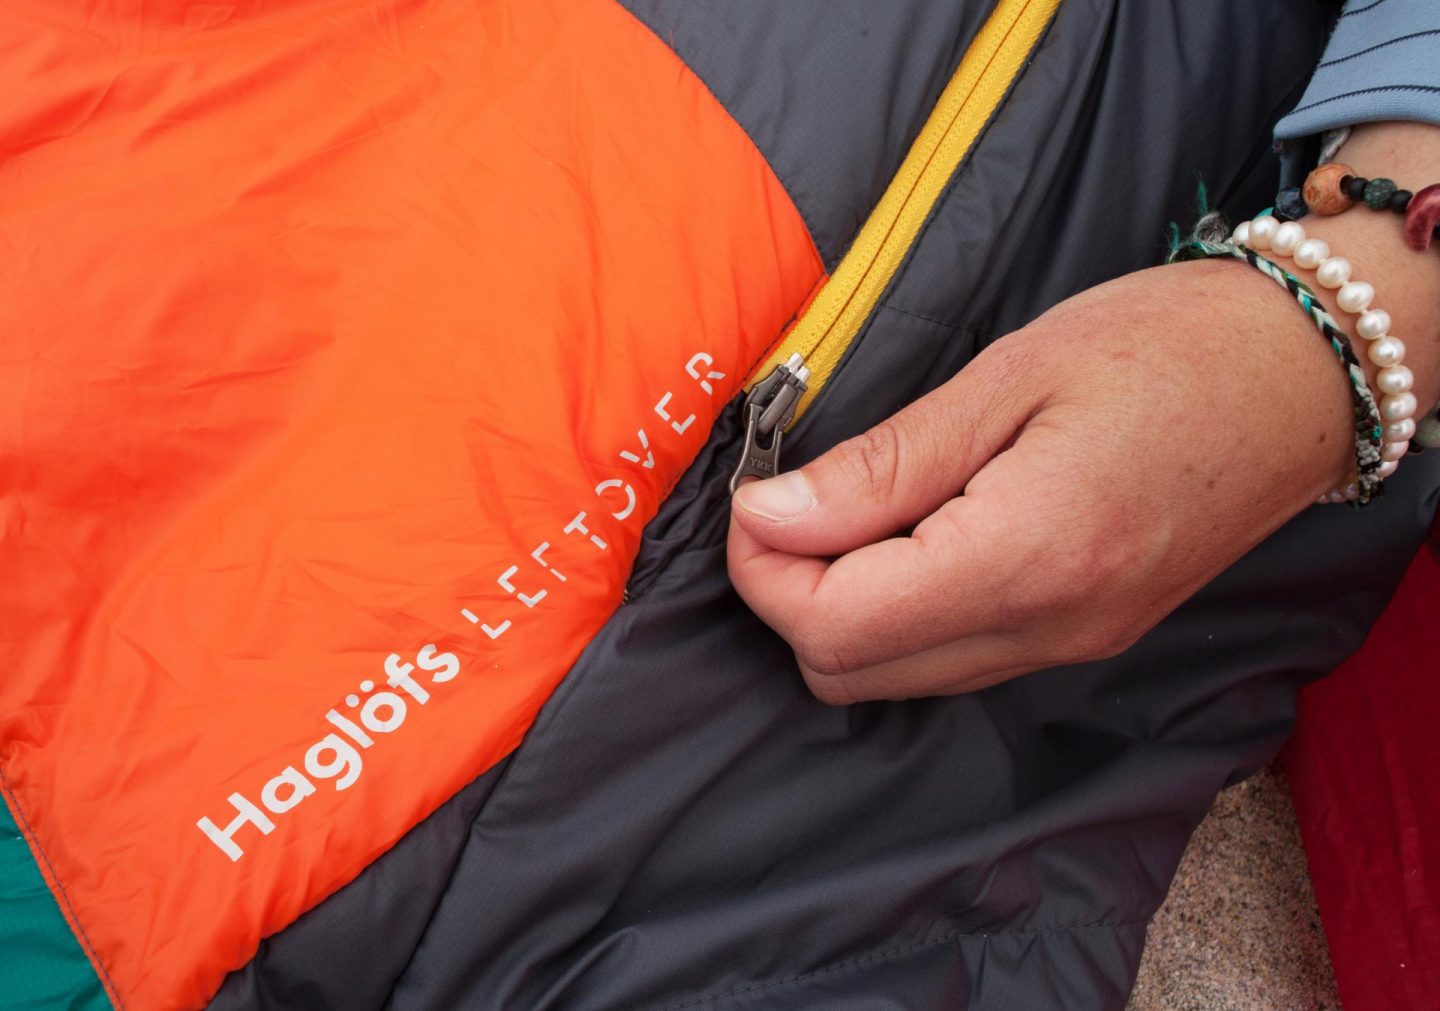 How to look after outdoor kit: cleaning, maintenance and repair for sleeping bags